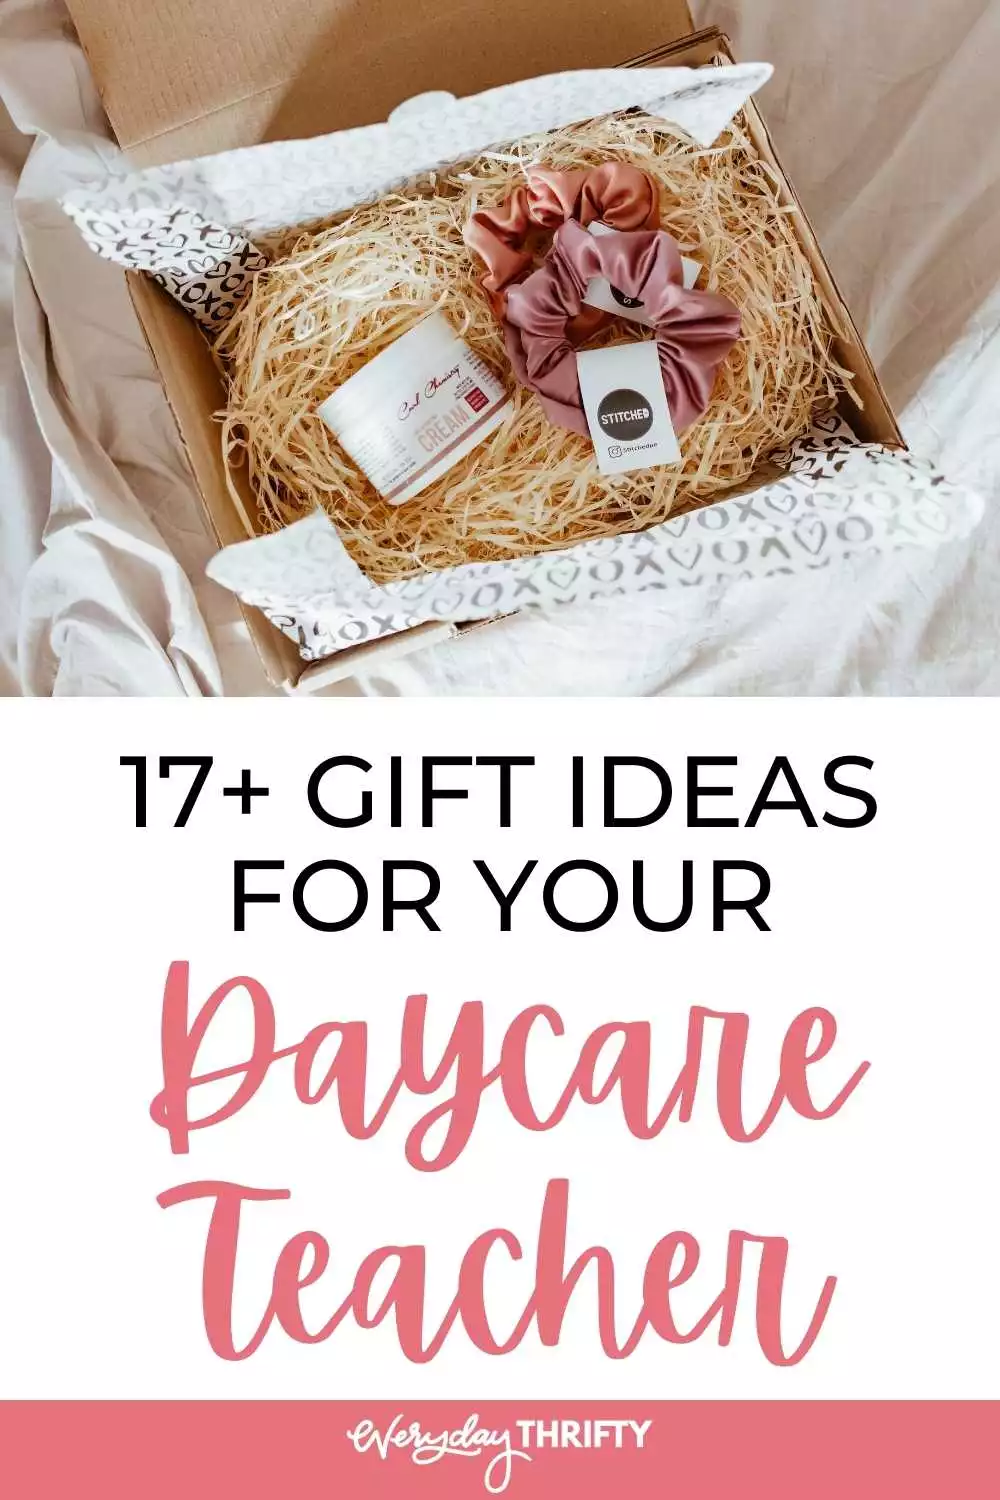 Get ideas of gifts for daycare teachers when transitioning. 